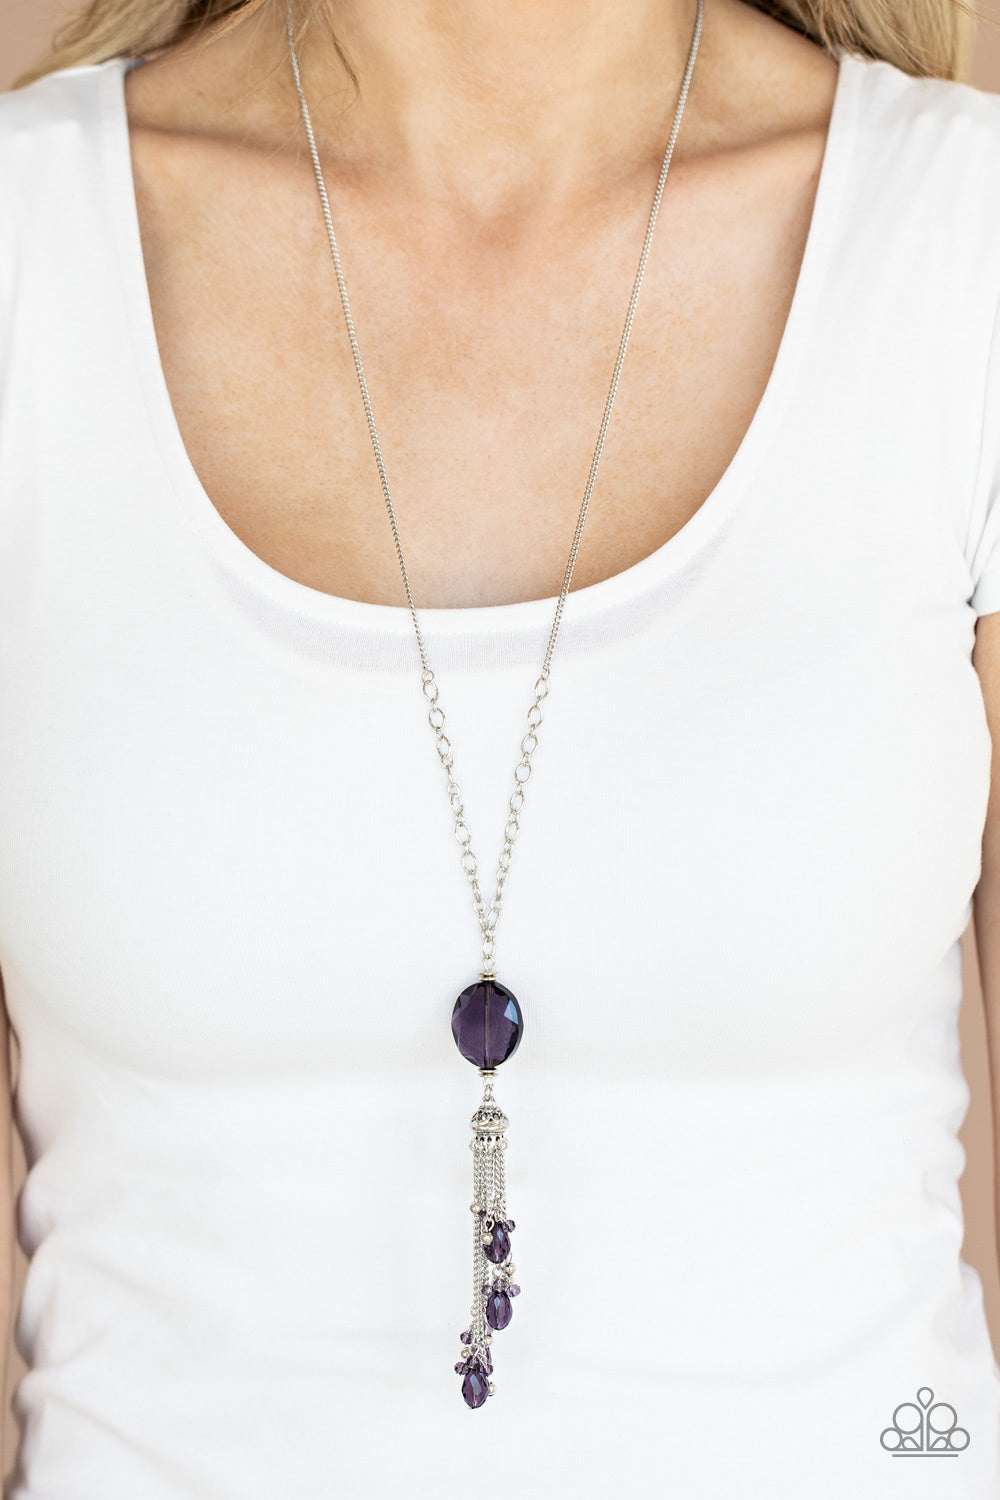 Fringe Flavor- Purple and Silver Necklace- Paparazzi Accessories